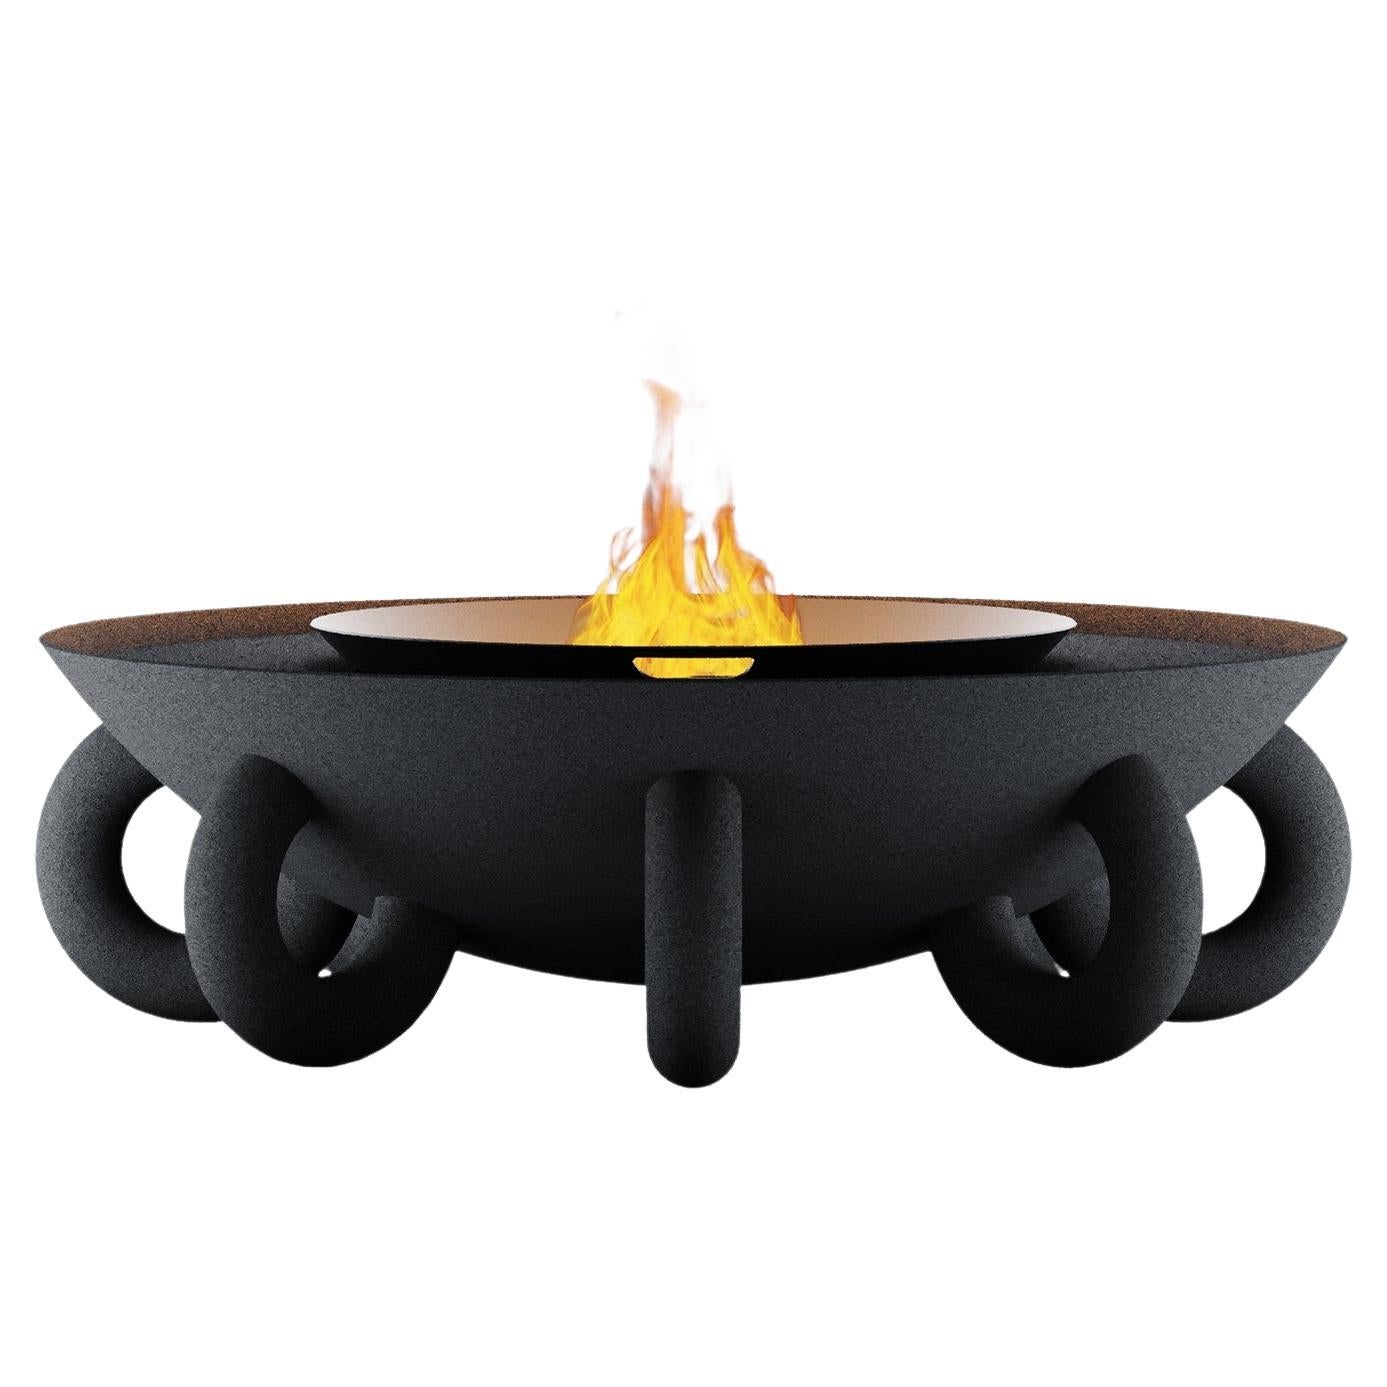 What is the best metal for a fire pit?